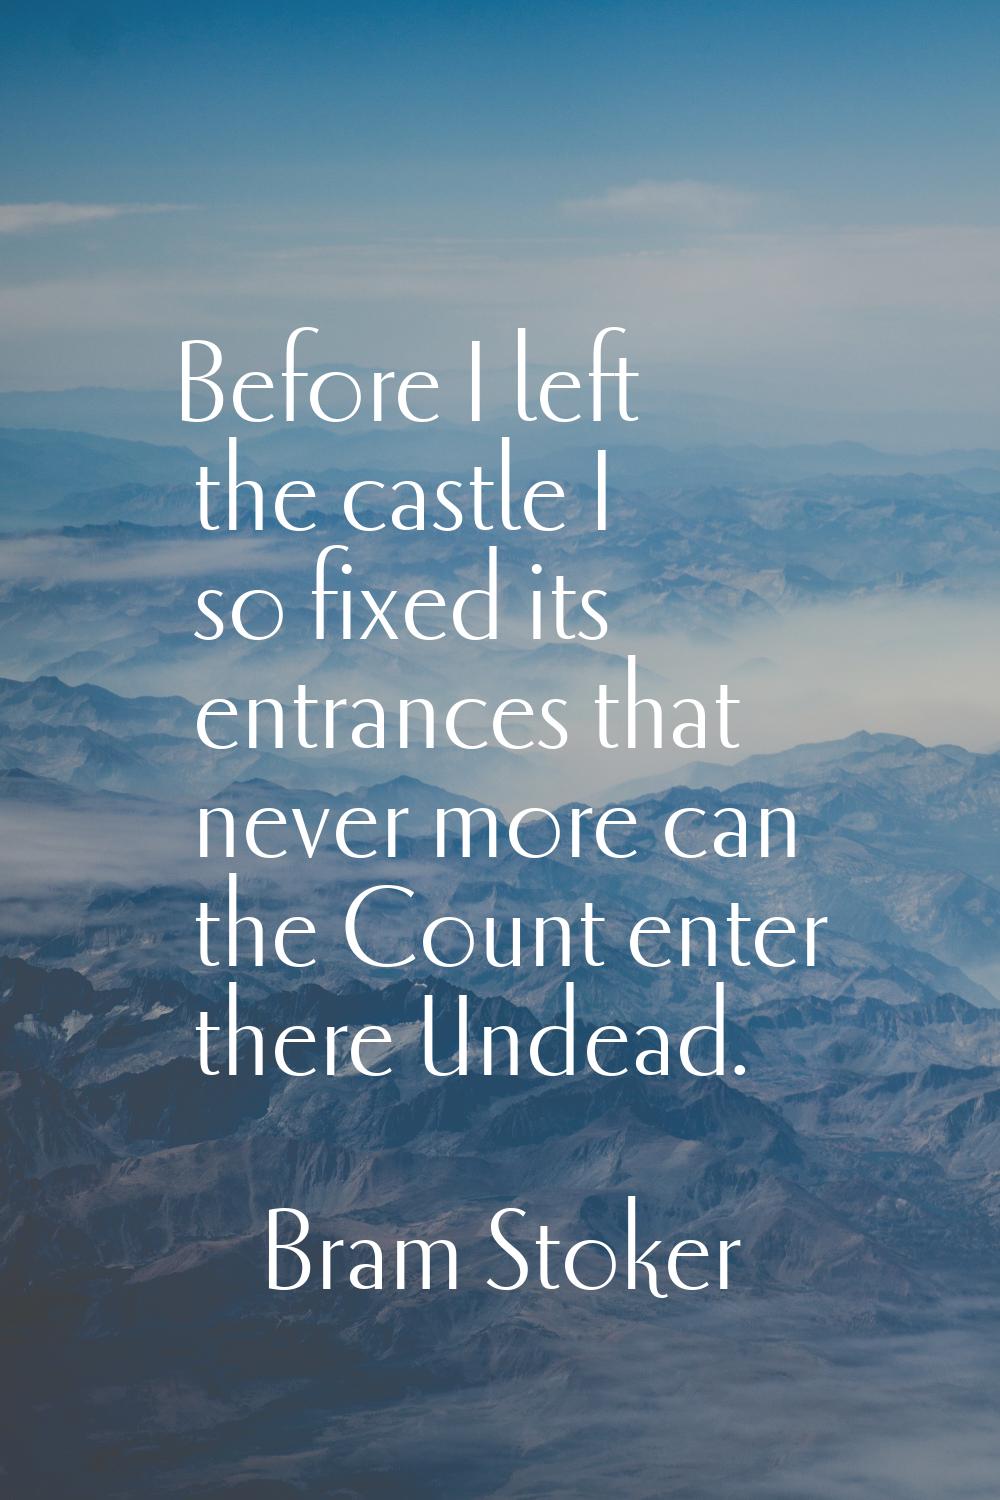 Before I left the castle I so fixed its entrances that never more can the Count enter there Undead.